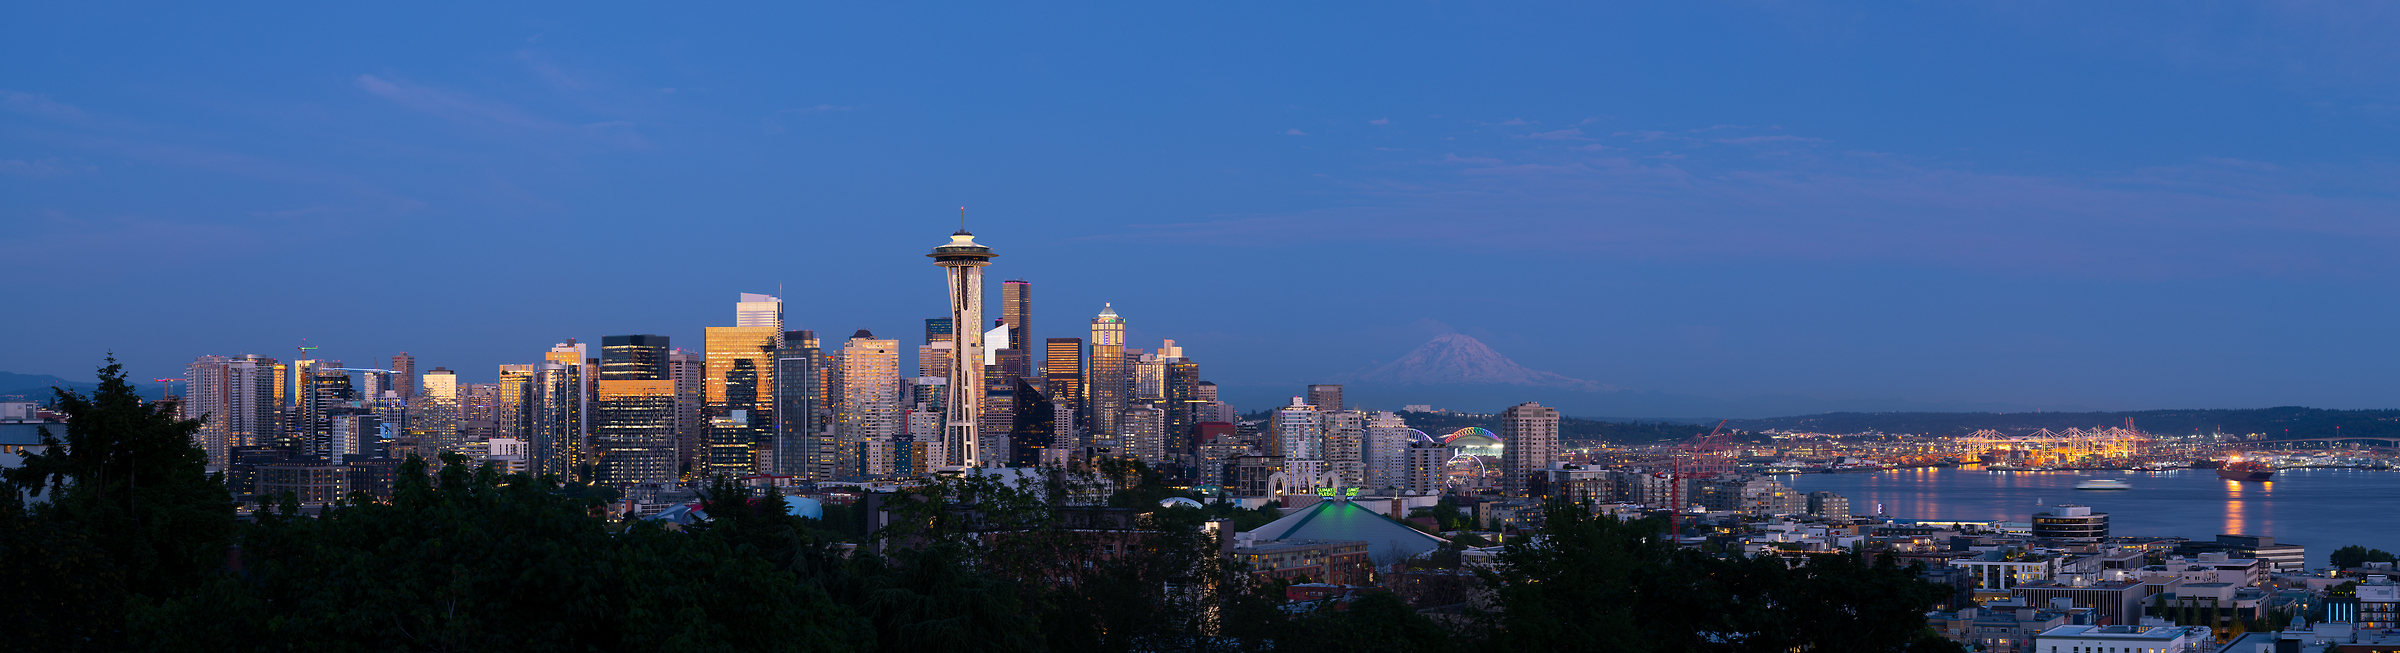 279 megapixels! A very high resolution, large-format VAST photo print of the Seattle skyline at dusk with Mt. Rainier in the background; wallpaper photograph created by Greg Probst in Kerry Park, Seattle, Washington.